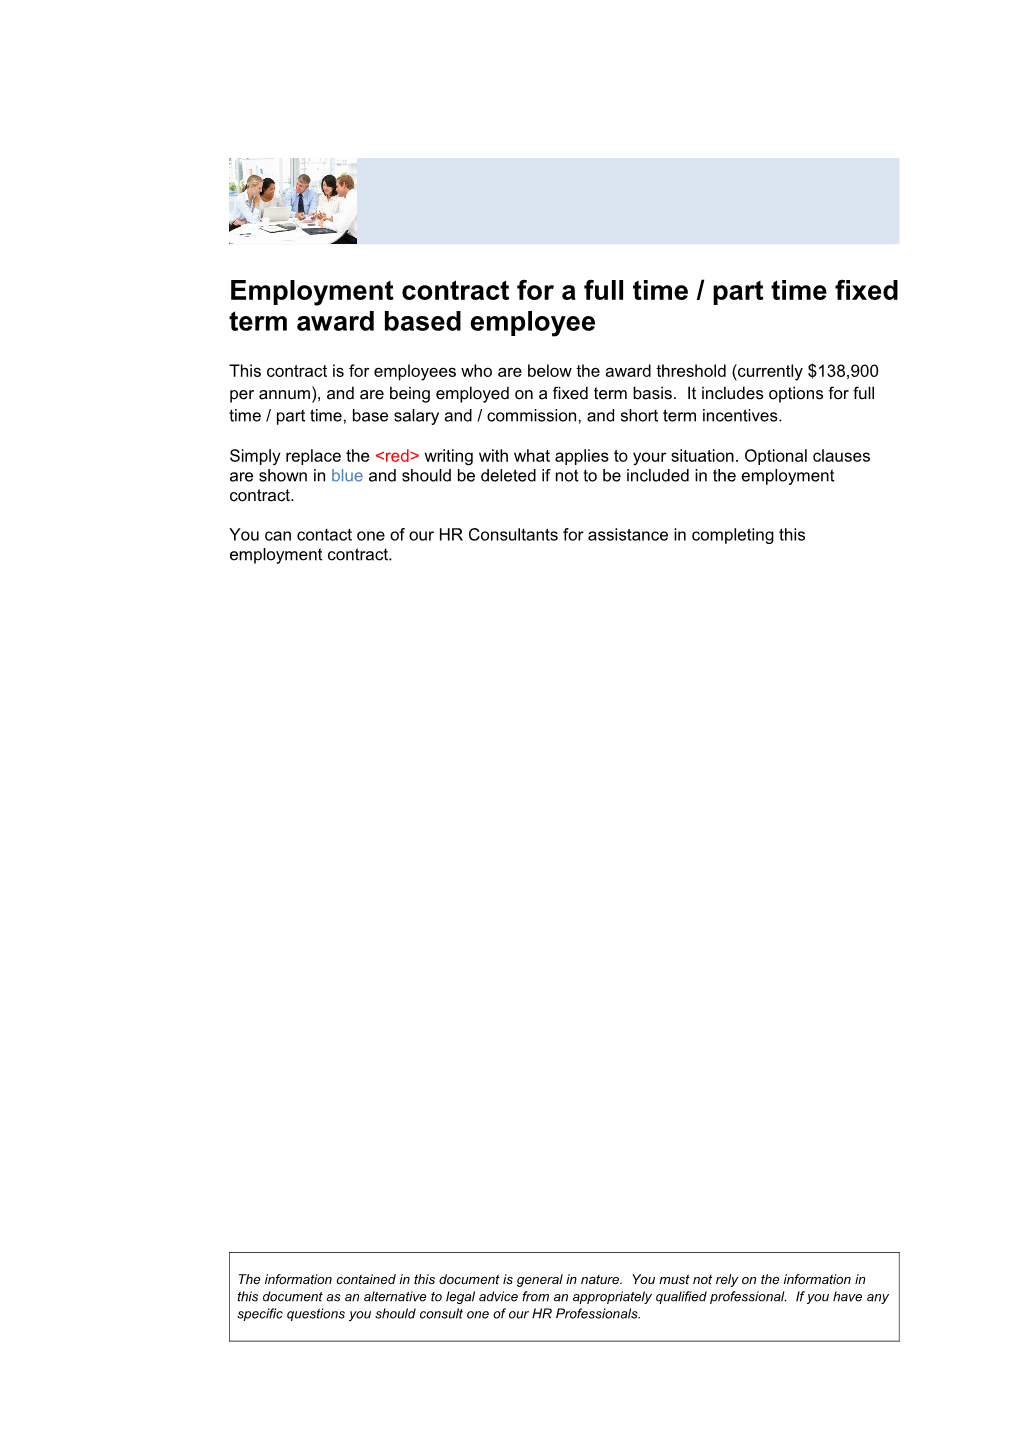 Employment Contract for a Full Time / Part Time Fixed Term Award Based Employee